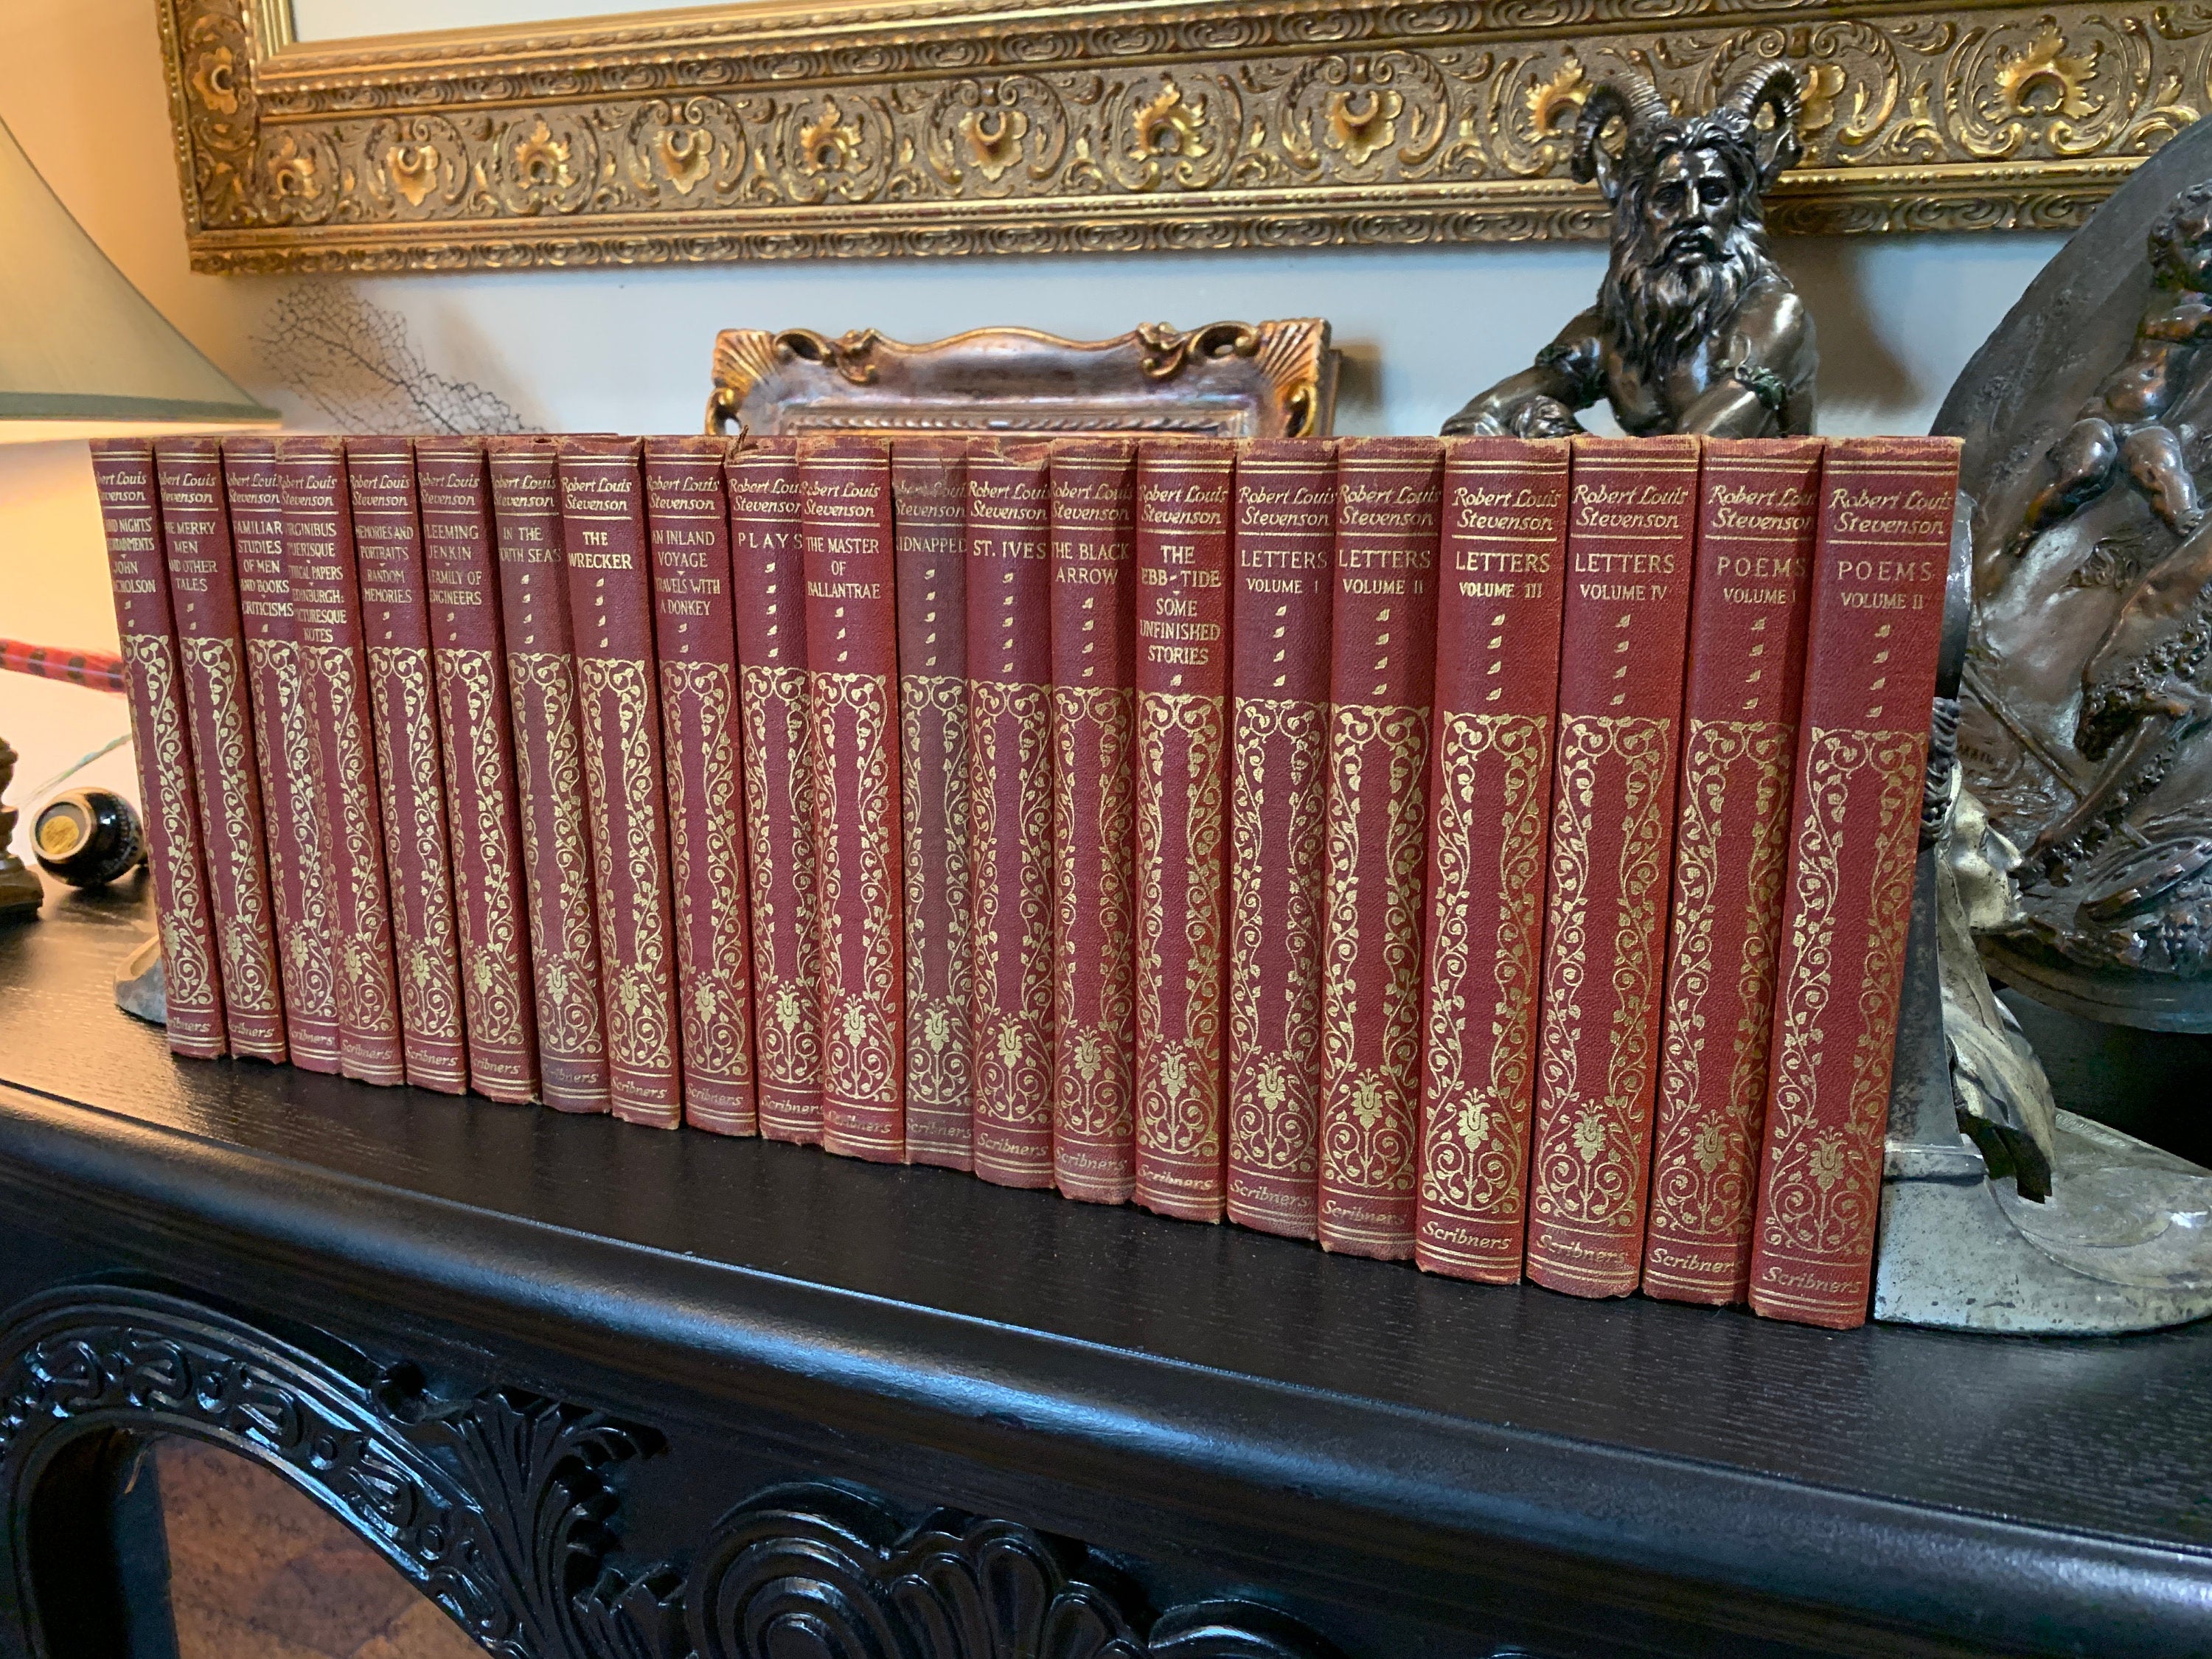 The Works of Robert Louis Stevenson, South Seas Ed, Incomplete, 21 out of 32 Volumes, 1925